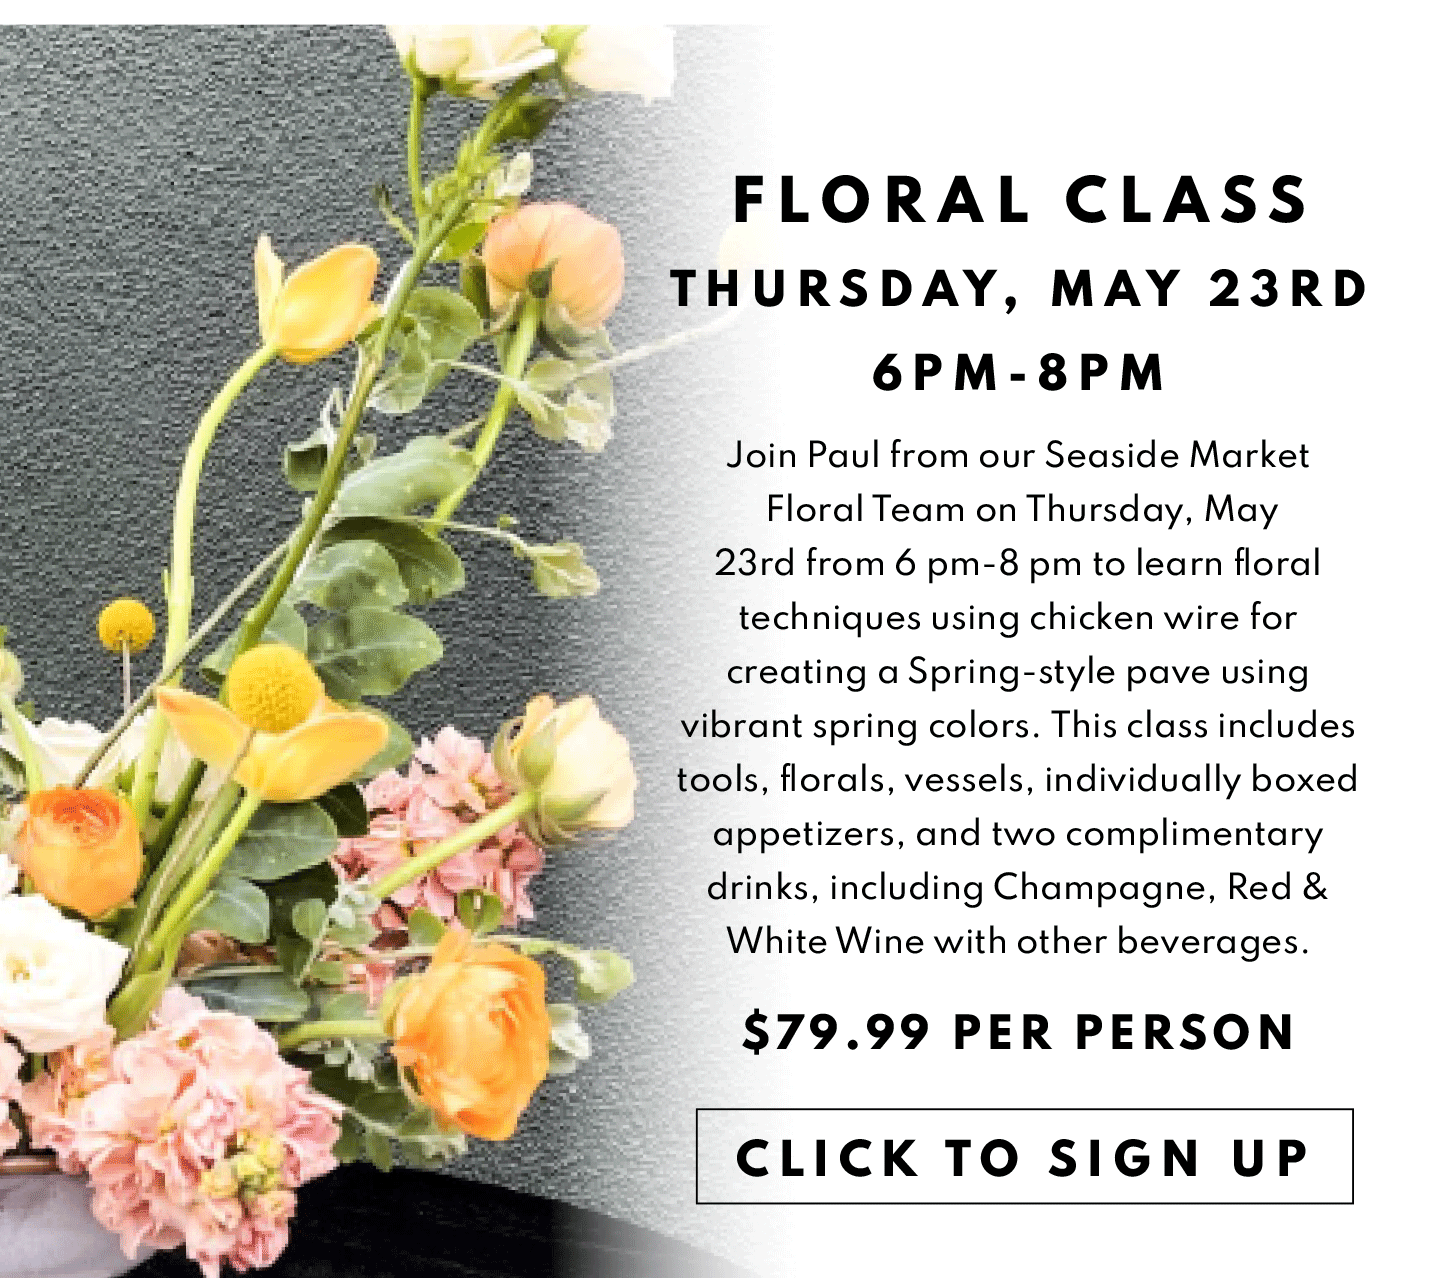 Floral Class Thurs May, 22nd - $79.99 per person